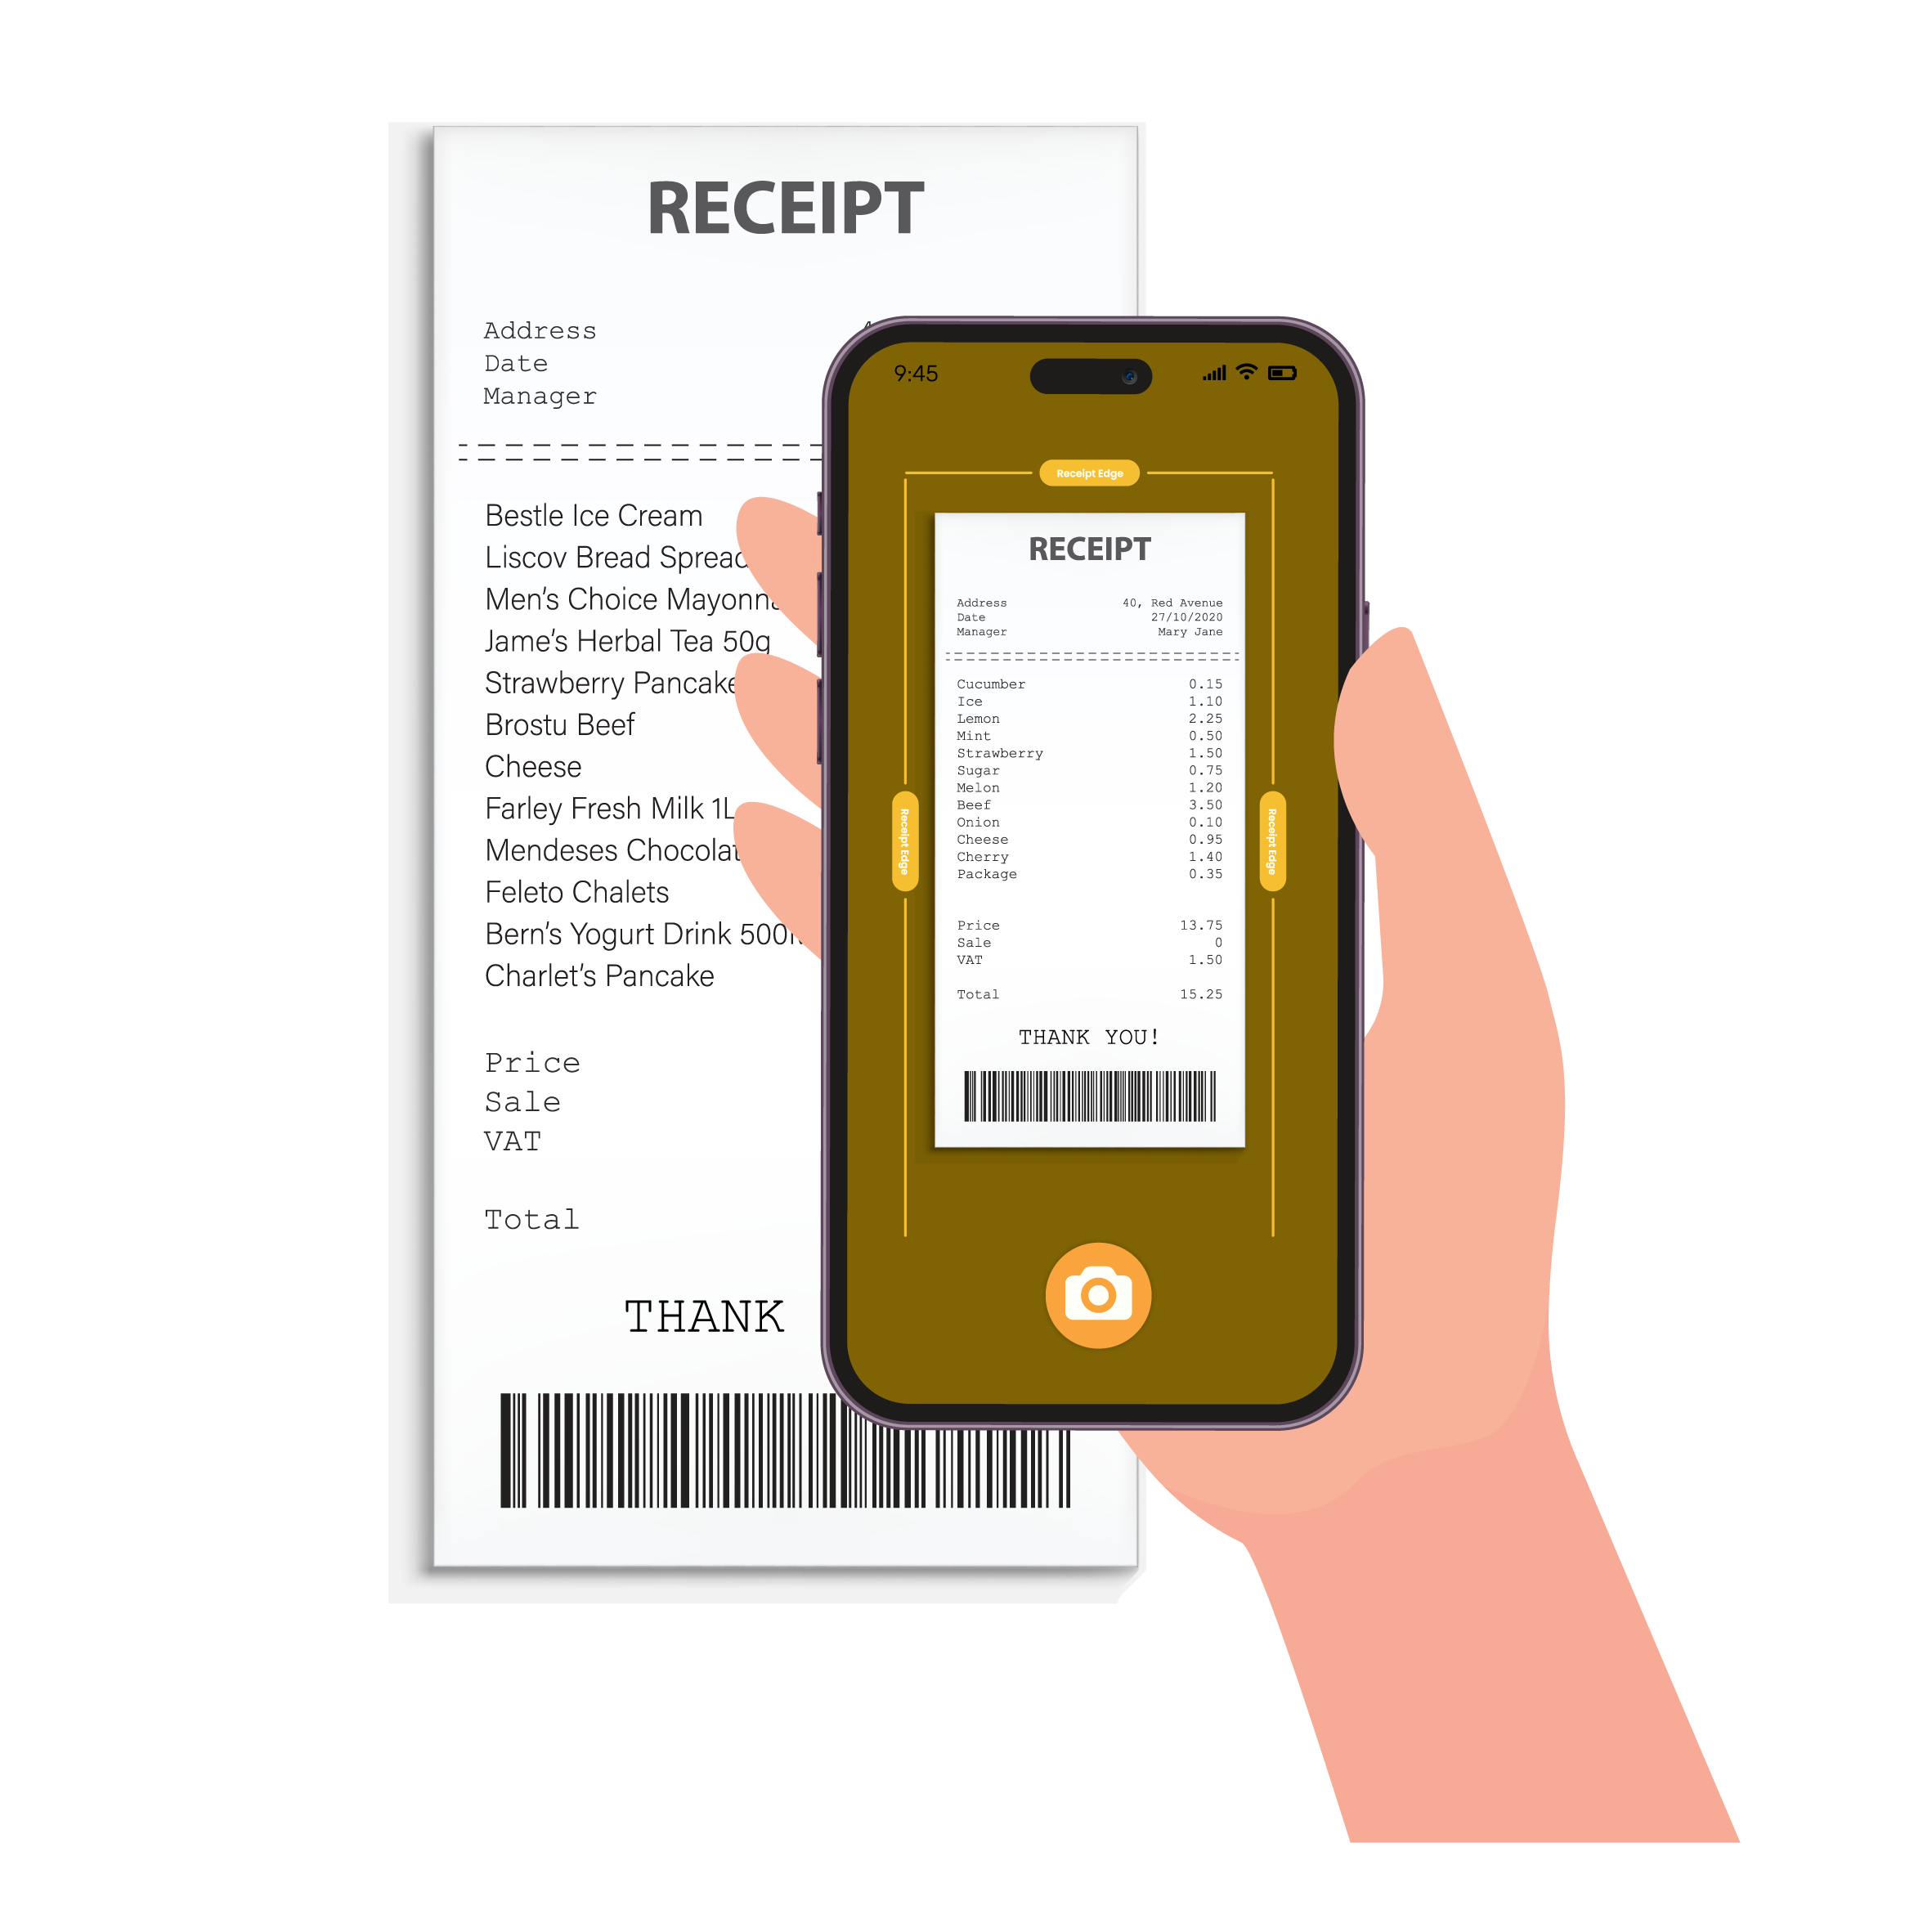 User upload receipts into the Buzz App to collect Buzz Points so they can redeem exciting rewards such as gift cards, eVouchers, e-vouchers, vouchers, eWallet Reload PINs, Discount Codes, Promo Codes, Promo Value, Promo Discount, and more.